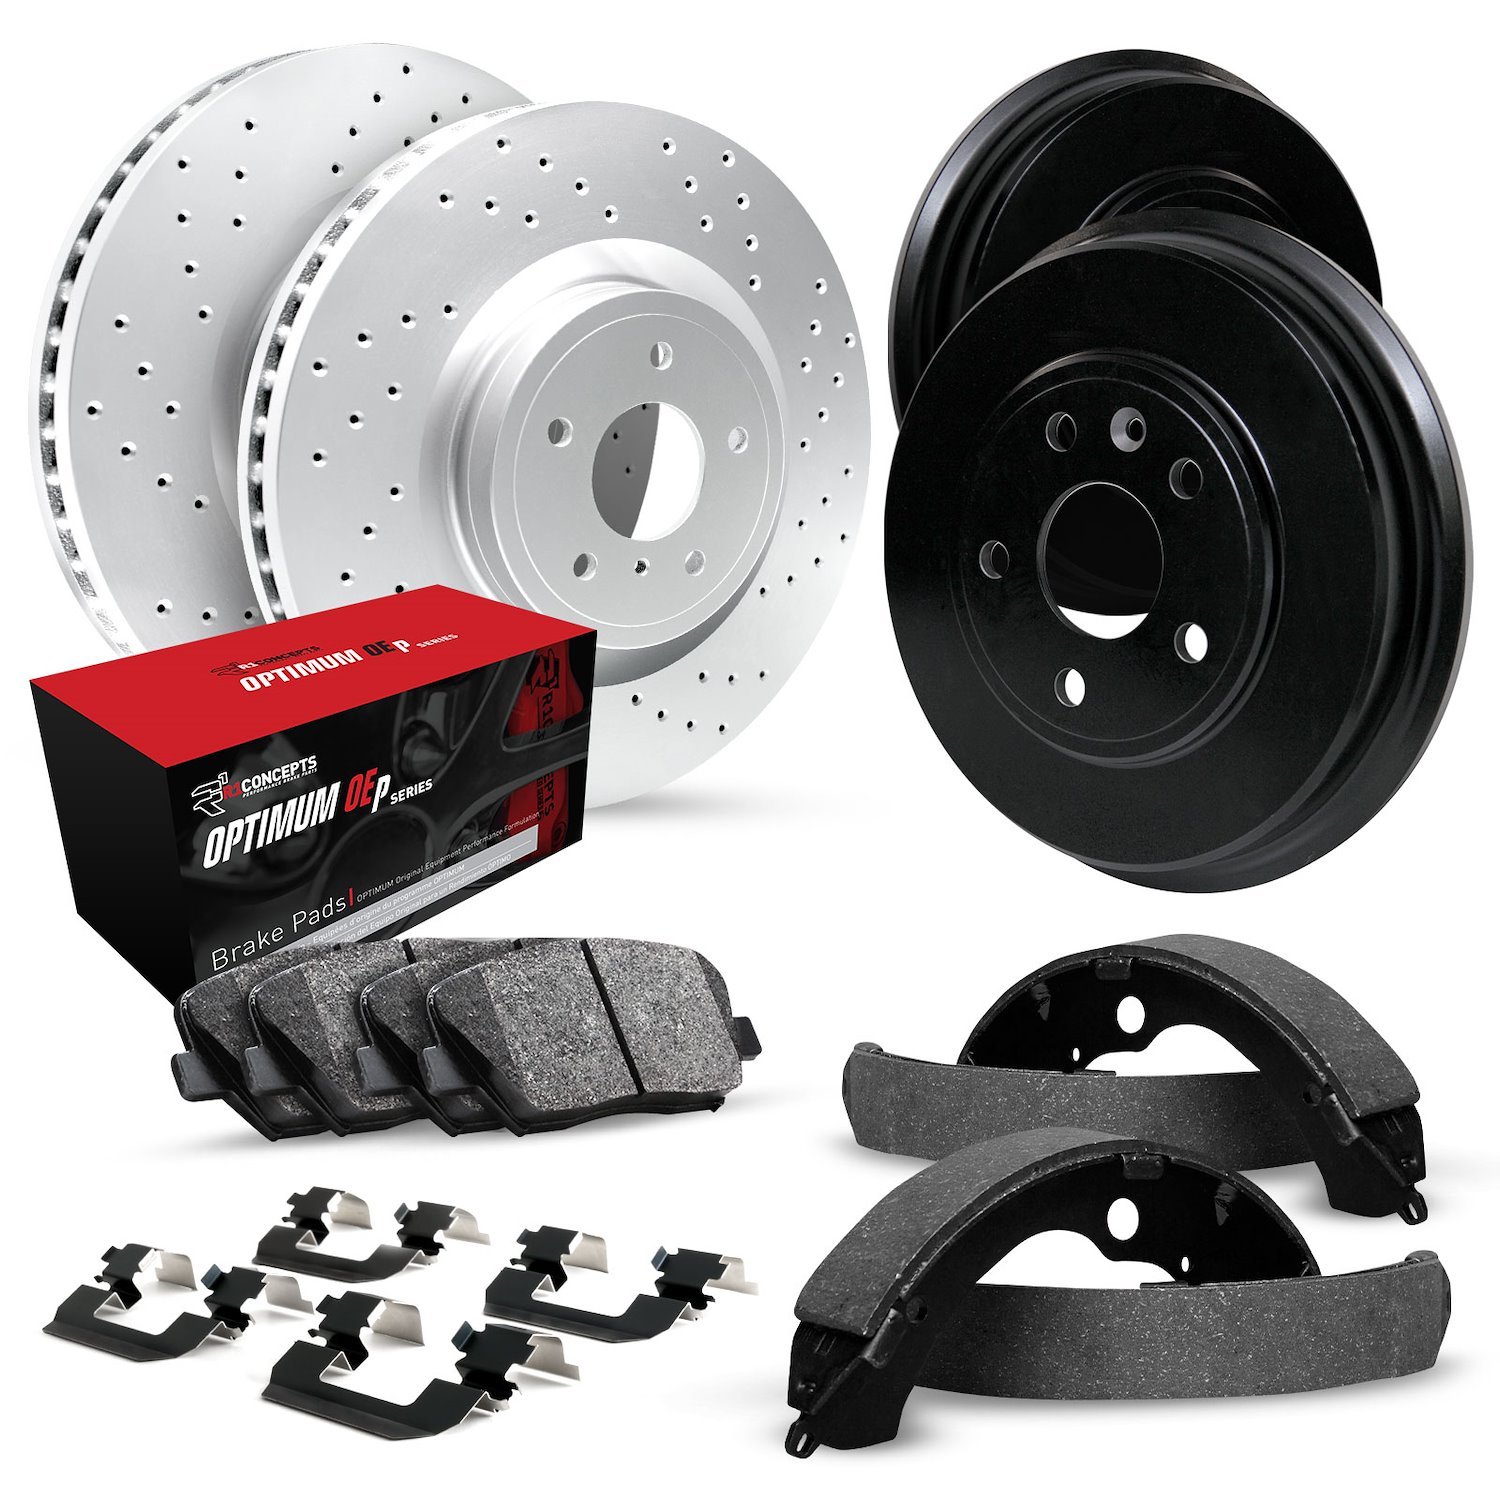 GEO-Carbon Drilled Brake Rotor & Drum Set w/Optimum OE Pads, Shoes, & Hardware, 1991-1993 GM, Position: Front & Rear